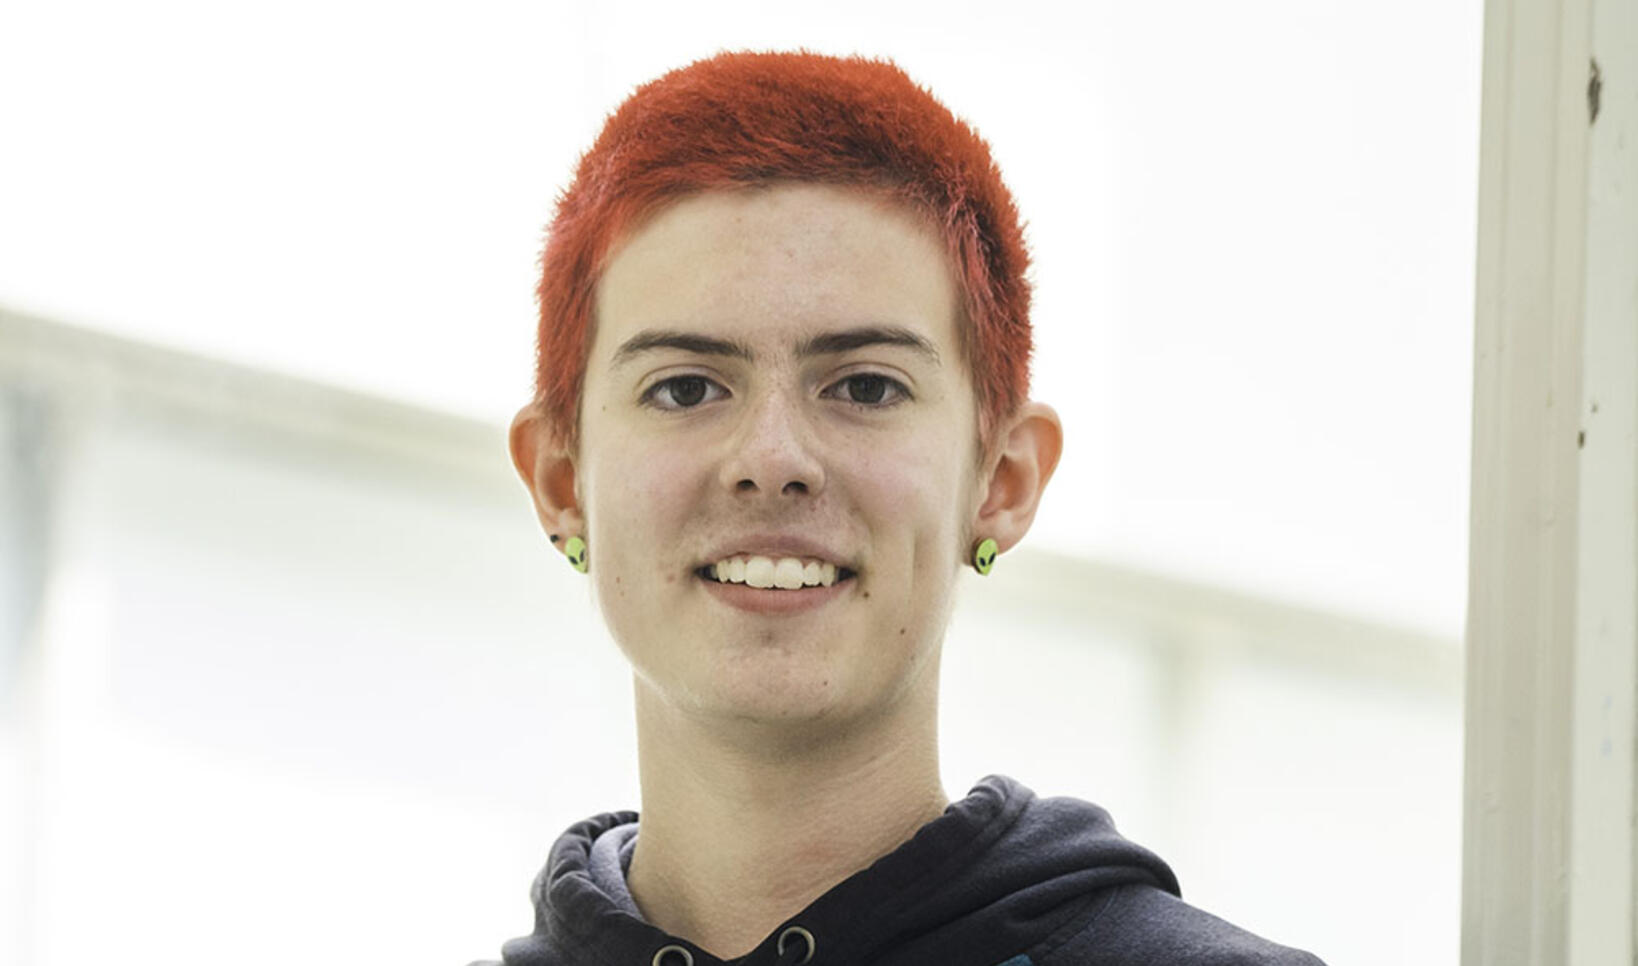 PCSS student standing in front of a white background with red hair and a hoodie.